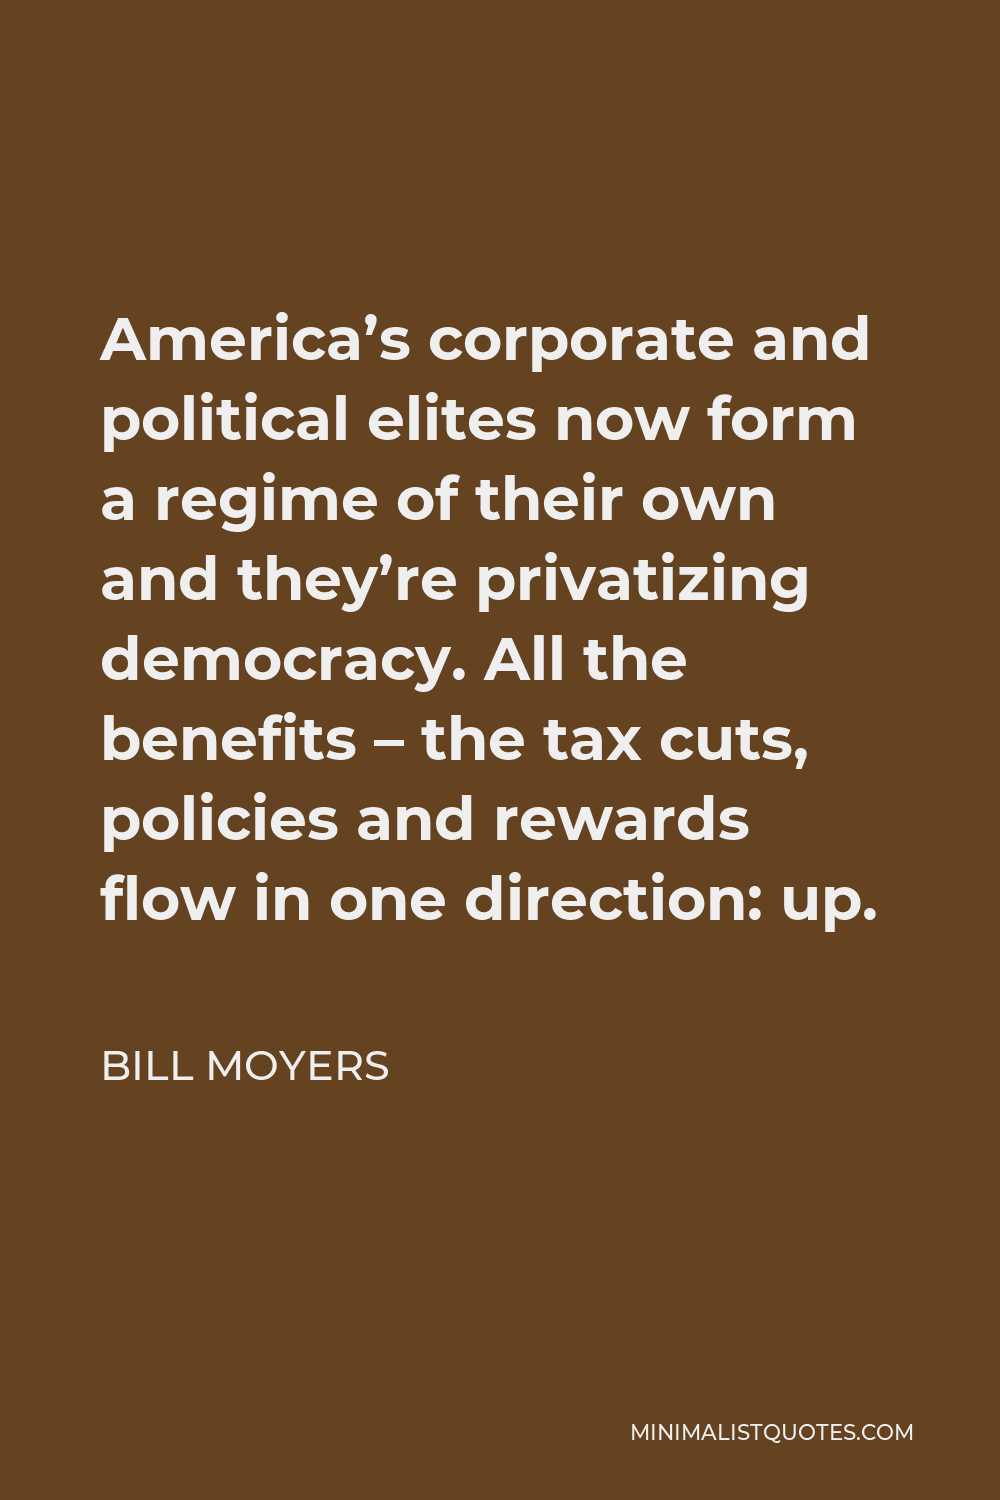 Bill Moyers Quote - America’s corporate and political elites now form a regime of their own and they’re privatizing democracy. All the benefits – the tax cuts, policies and rewards flow in one direction: up.